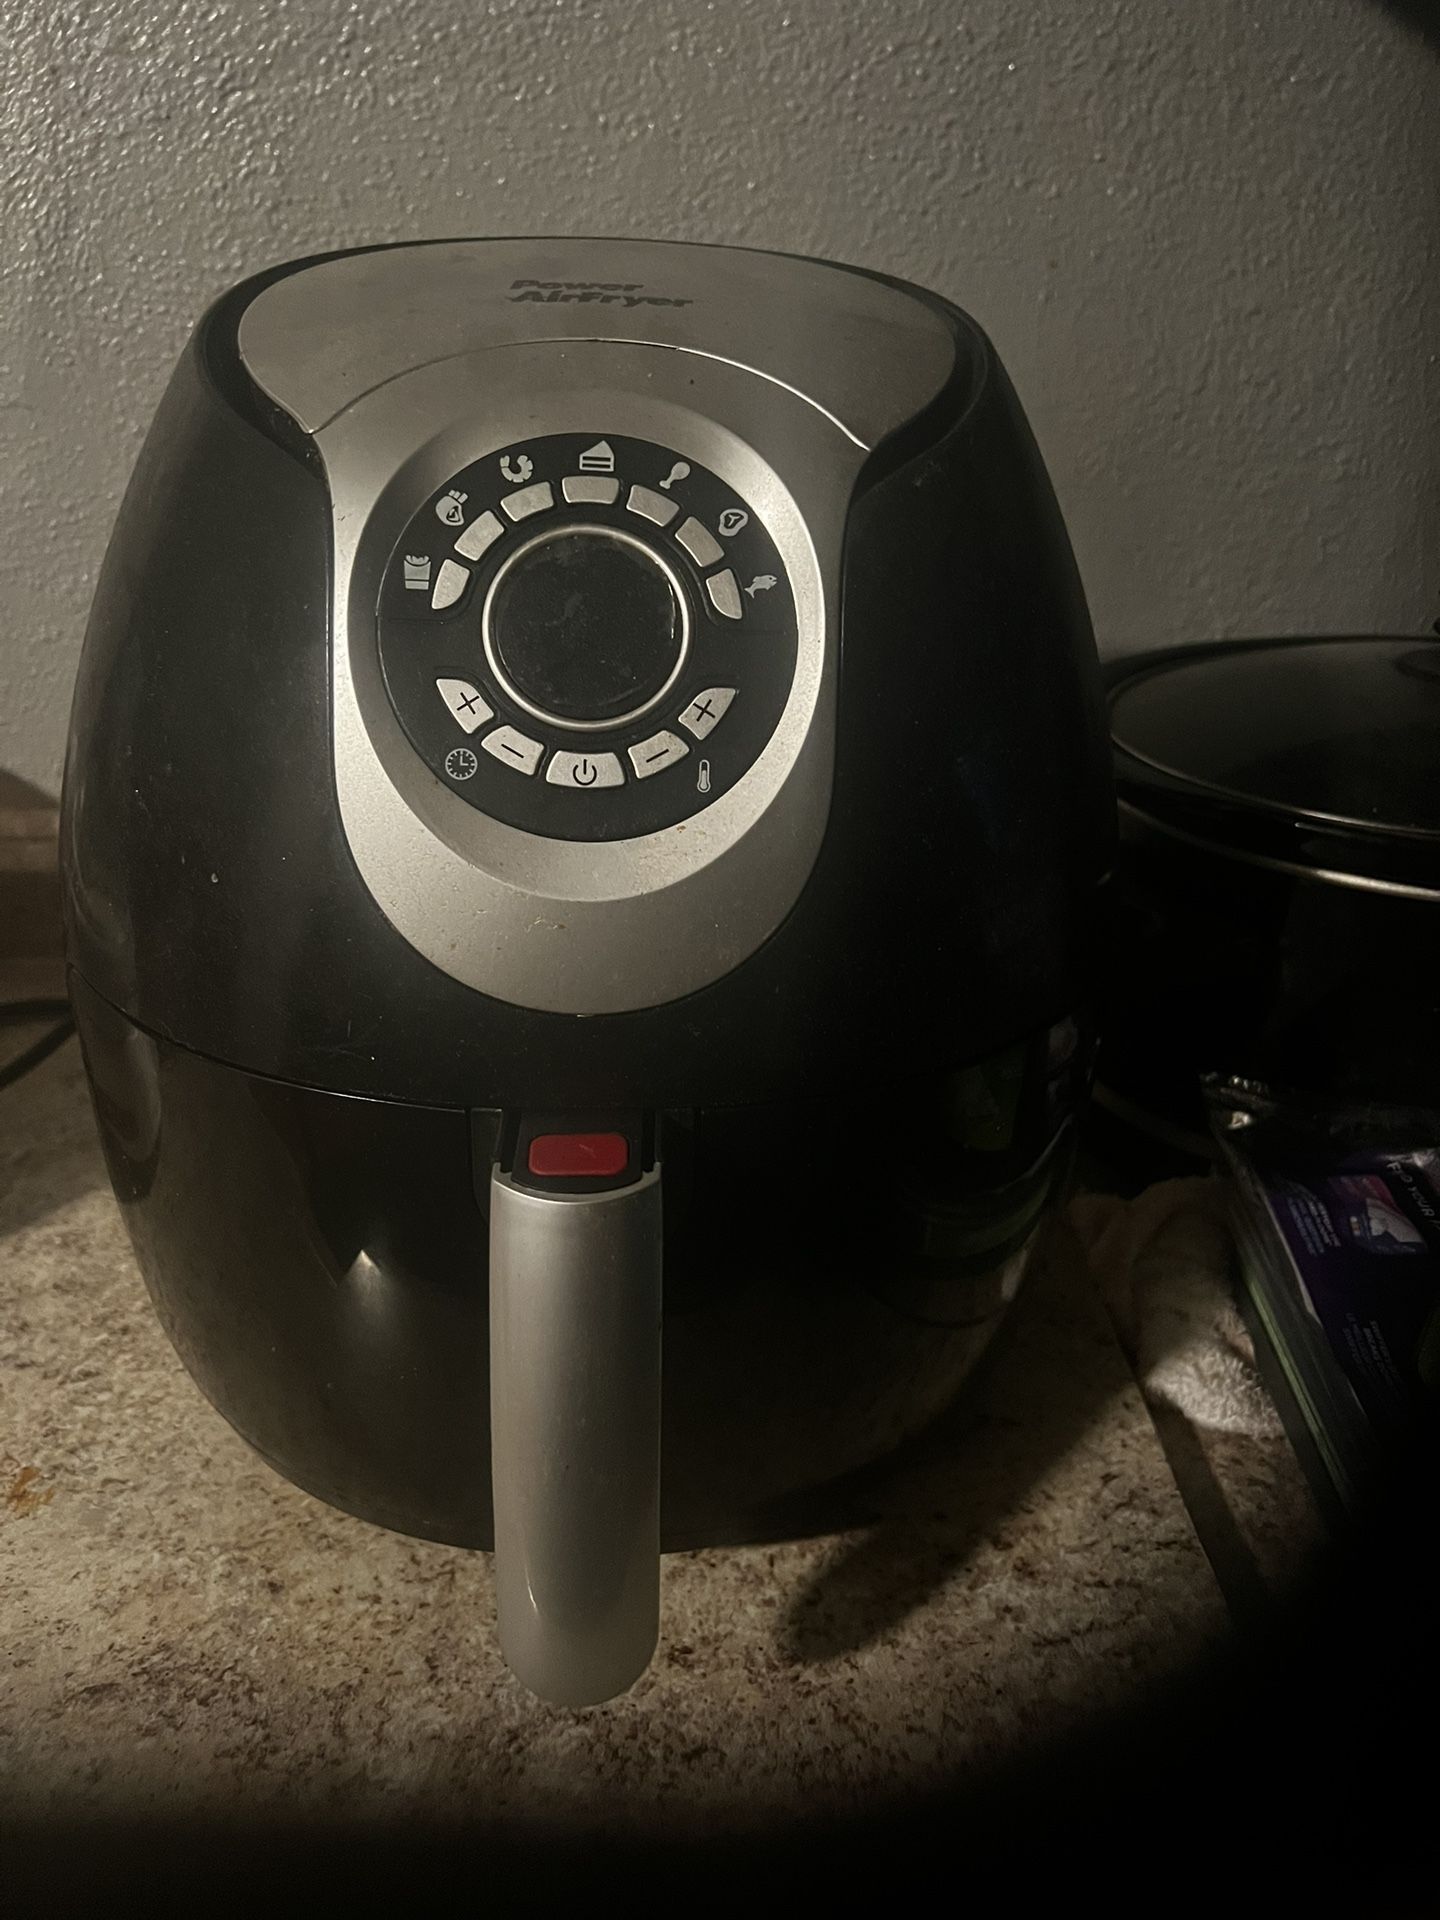 Air Fryer For Sale (Used)($60)